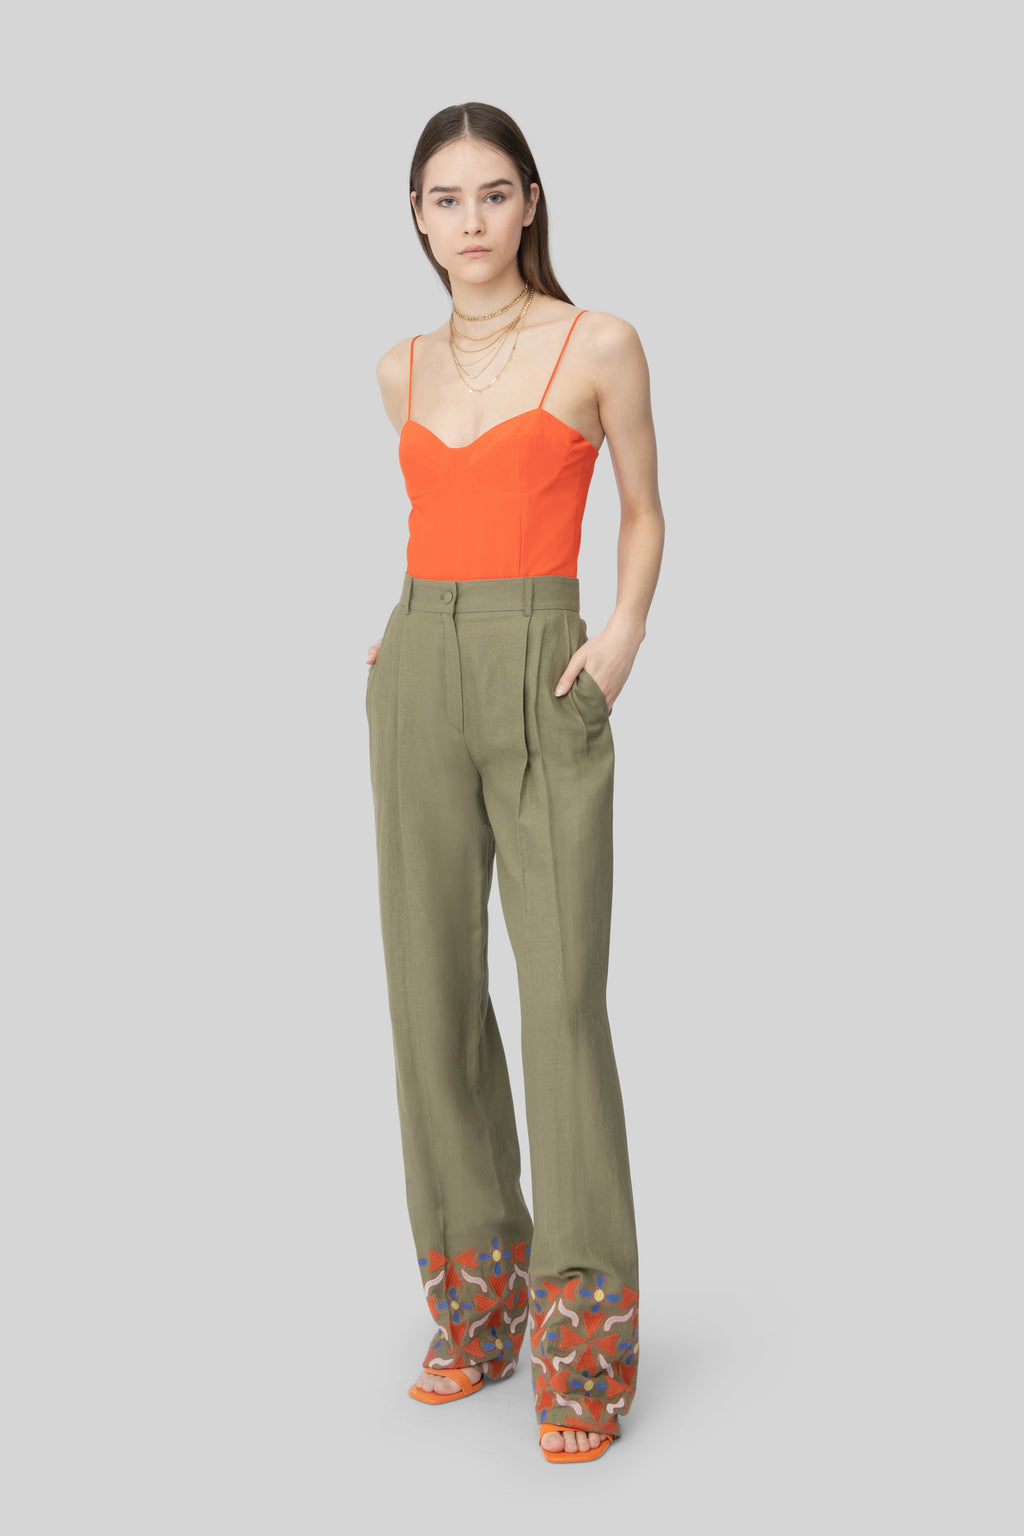 The Army Green & Orange Embroidered Linen Diane Pants